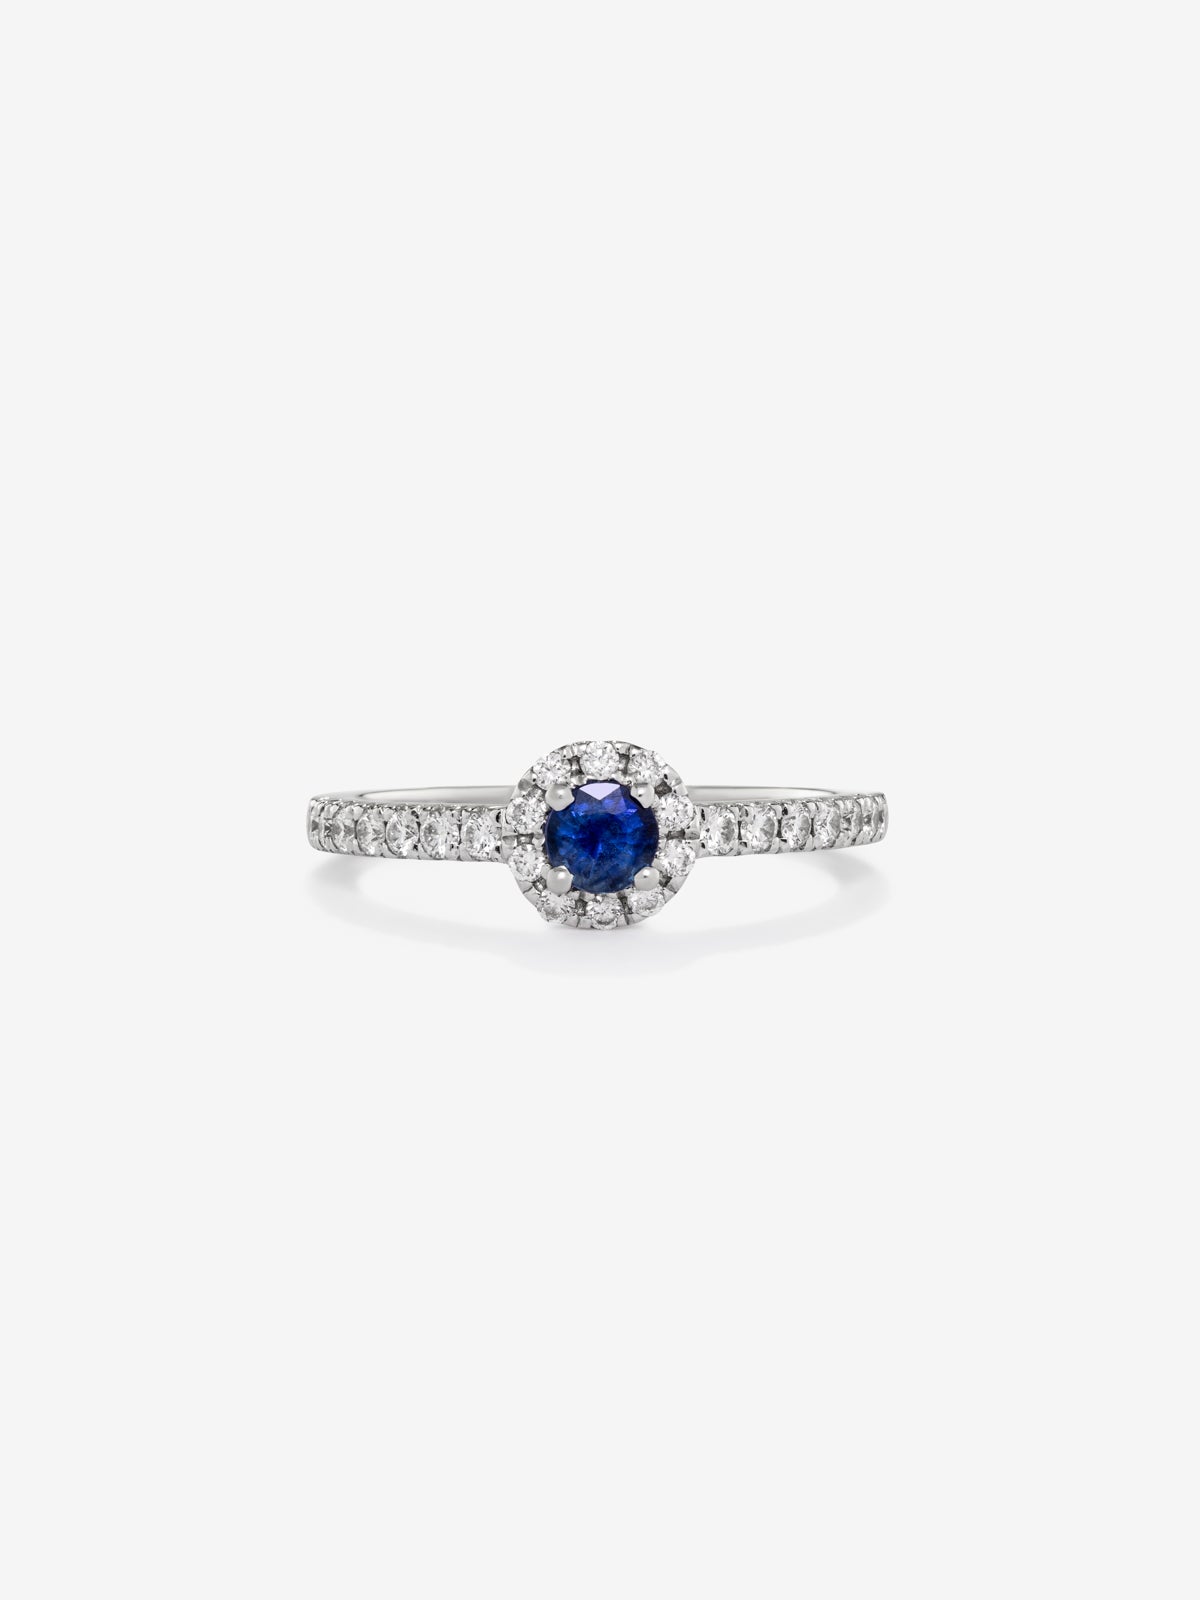 18K white gold ring with brilliant-cut blue sapphire of 0.4 cts and border and arm of 24 brilliant-cut diamonds with a total of 0.3 cts